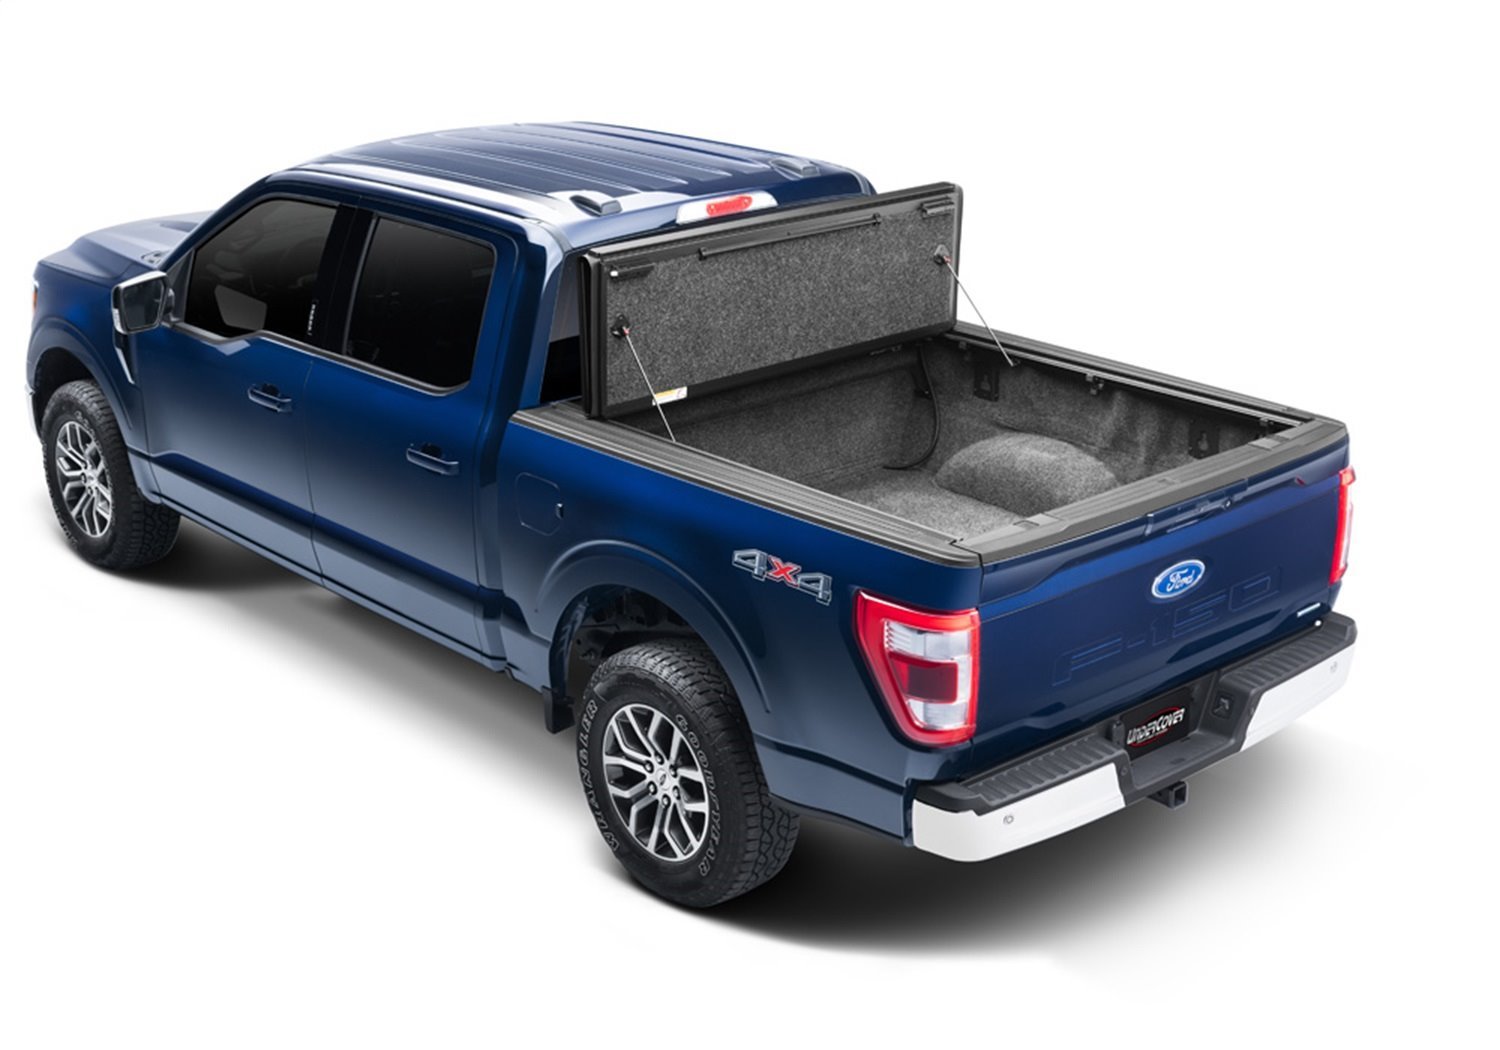 UX22030 Ultra Flex Hard Folding Cover, Fits Select Ford F-150 6'7" Bed STD/EXT/Crew, Matte Black Finish